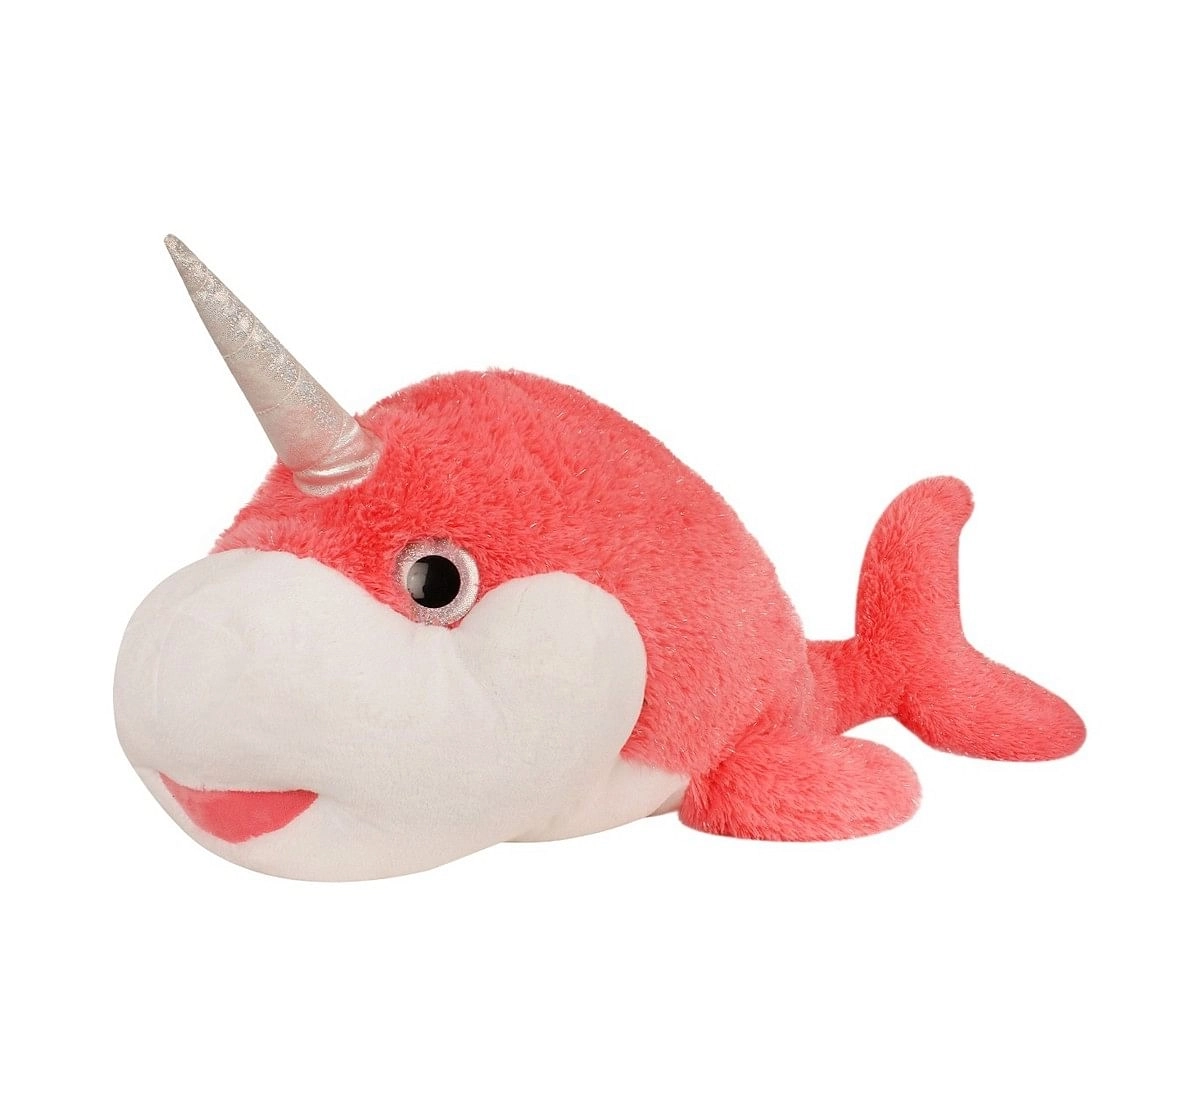 Fuzzbuzz The Narwhal Plush - Pink - 105Cm Quirky Soft Toys for Kids age 12M+ - 40 Cm (Pink)